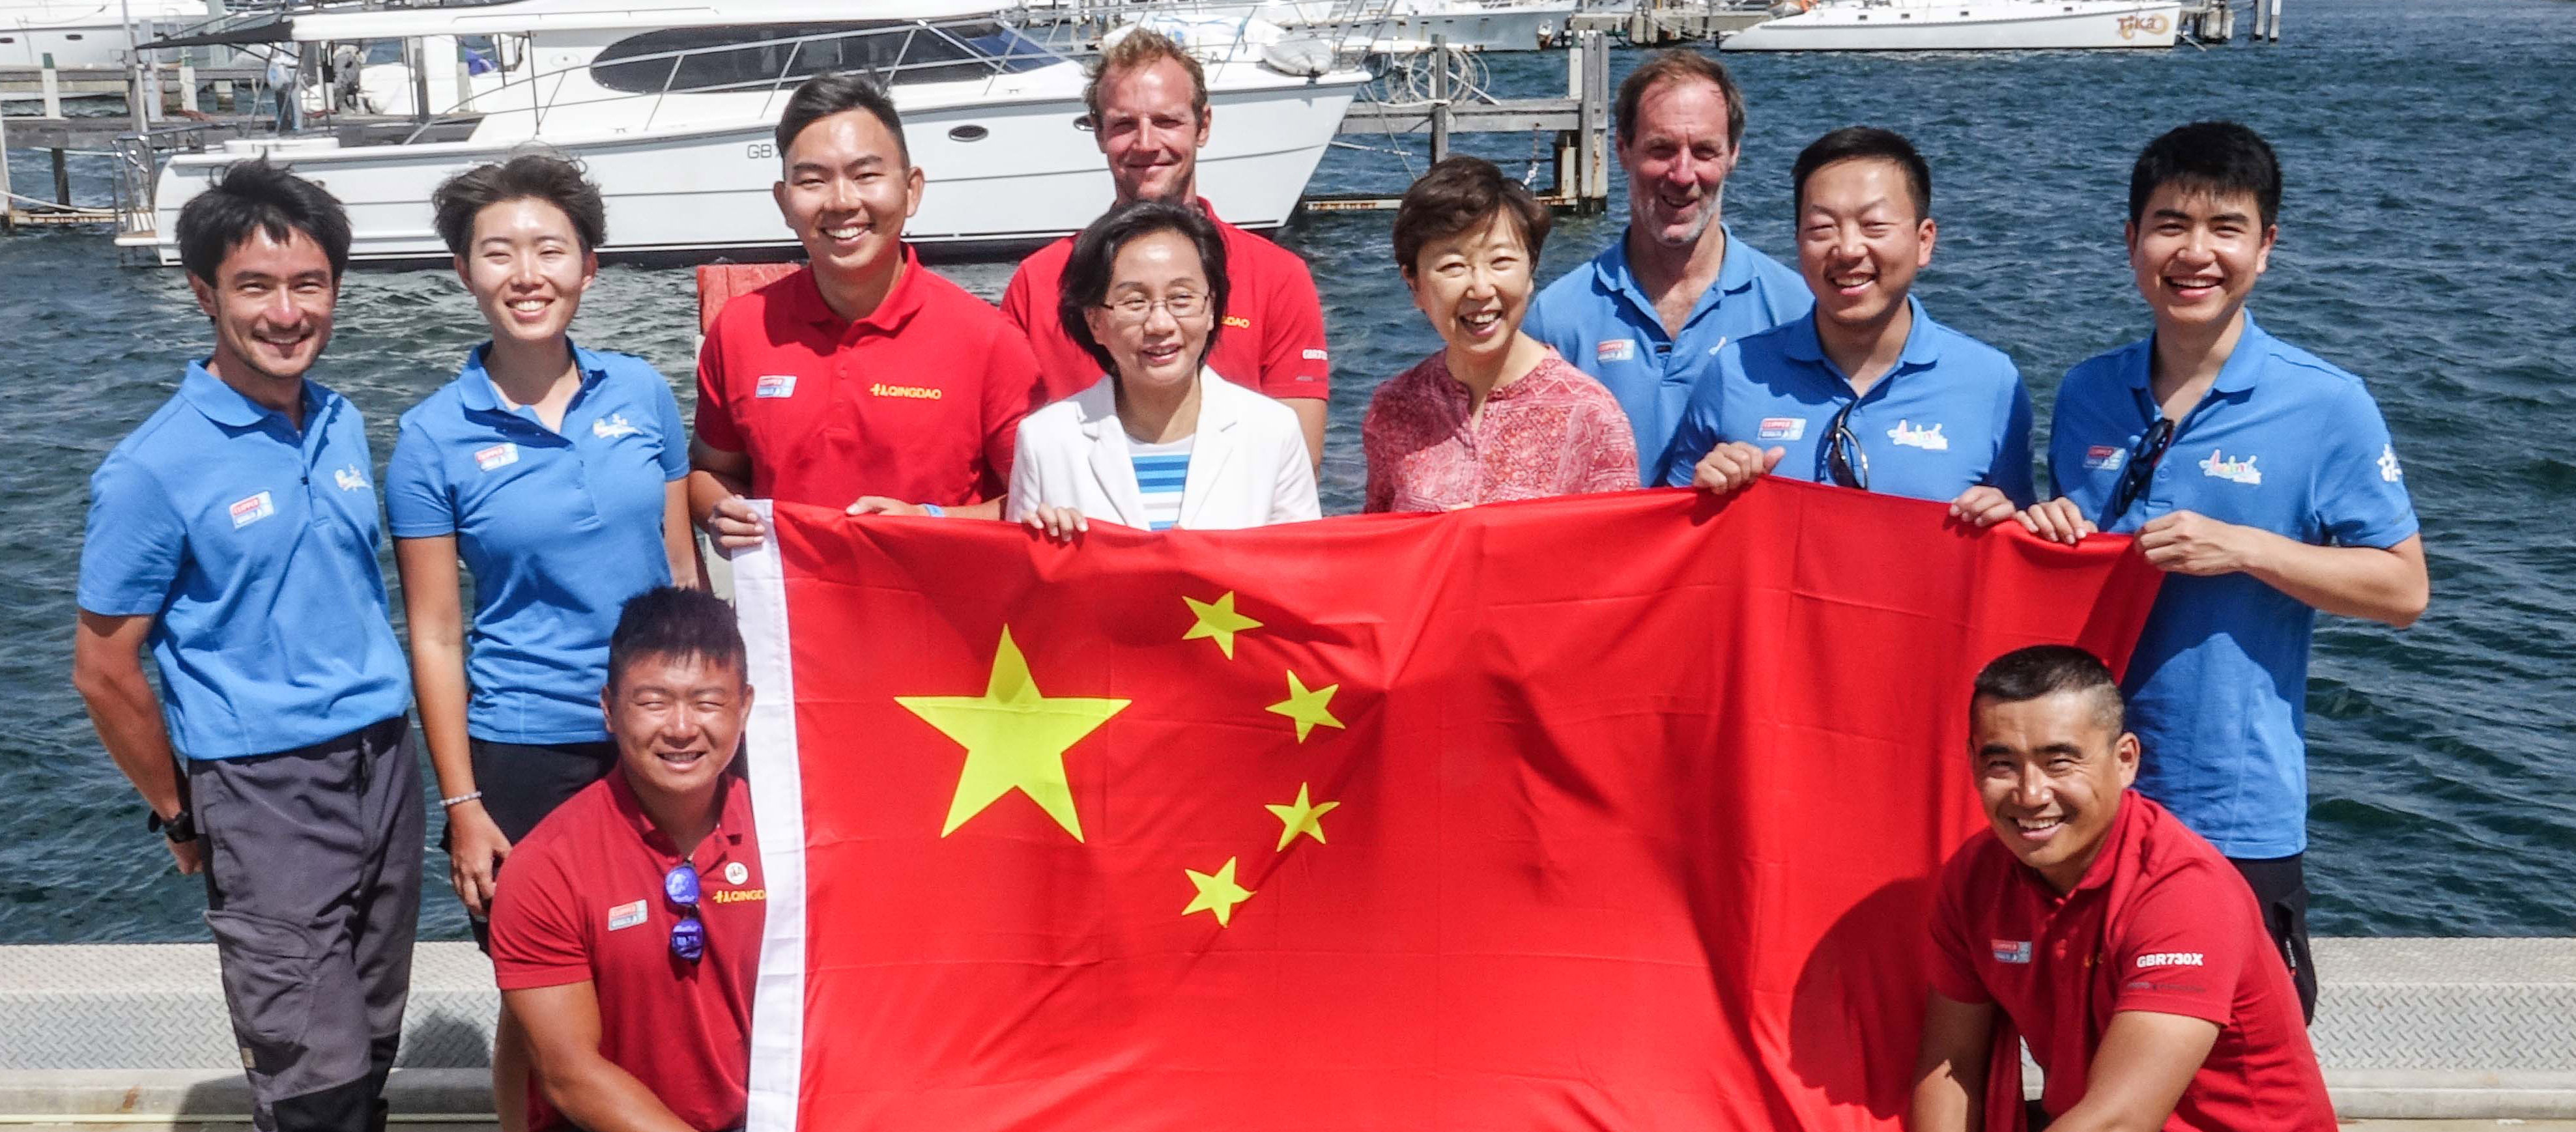 Chinese Consulate Visits Clipper Race Fleet in Fremantle